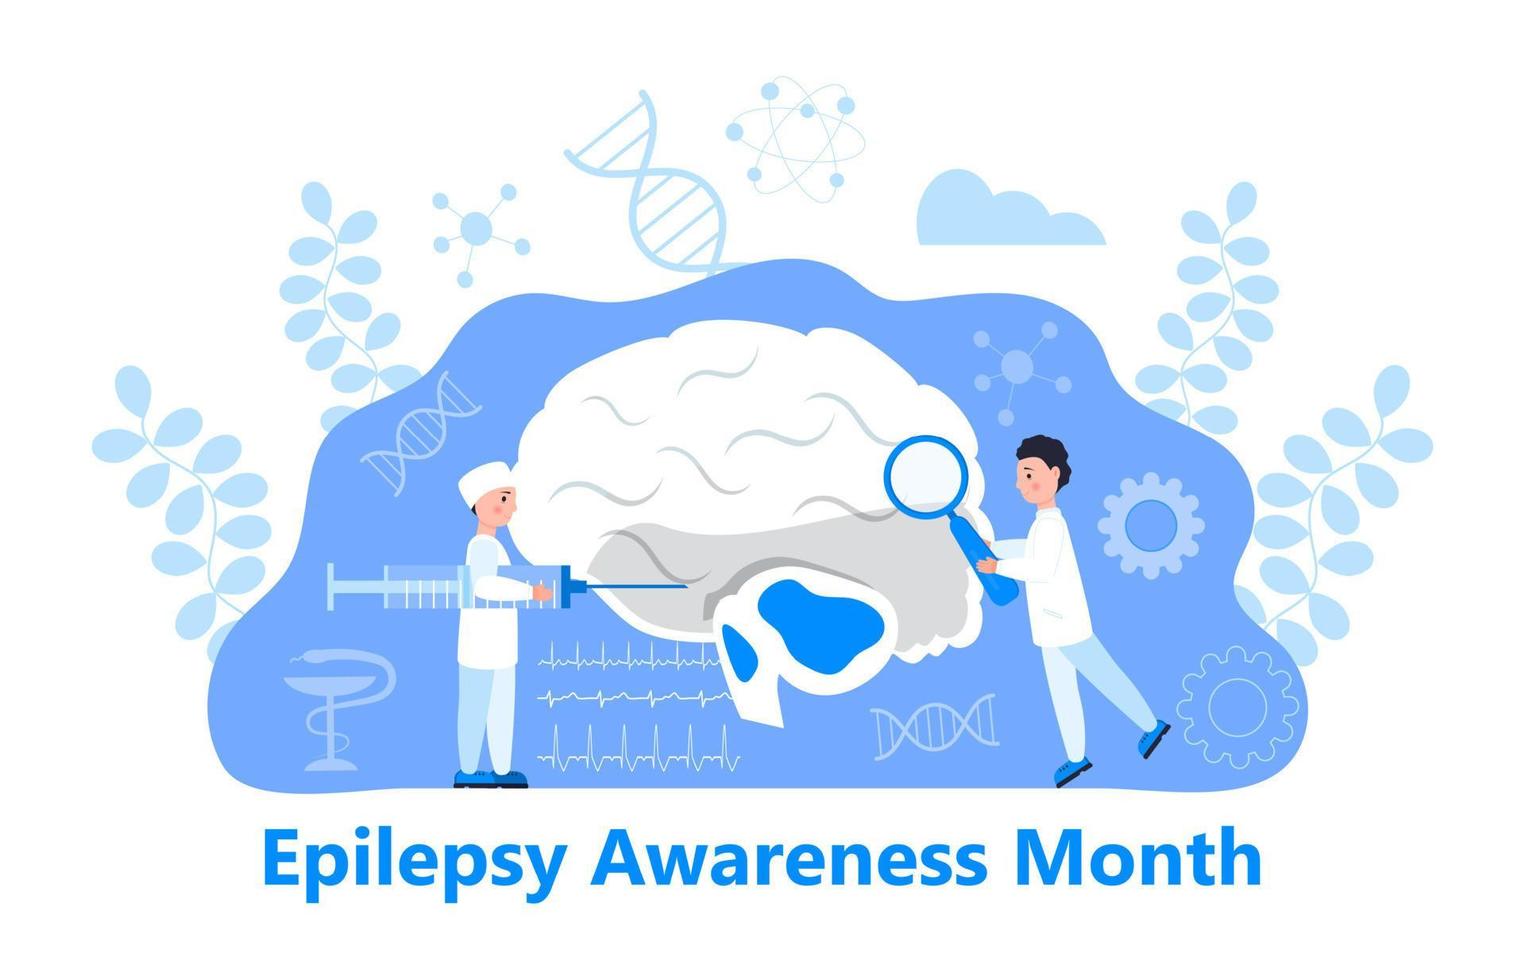 Epilepsy Awareness Month on November in USA concept vector. Brain, surgeon are shown. Tiny doctors treat brain. explores the causes of epilepsy. Cartoon concept vector for banne